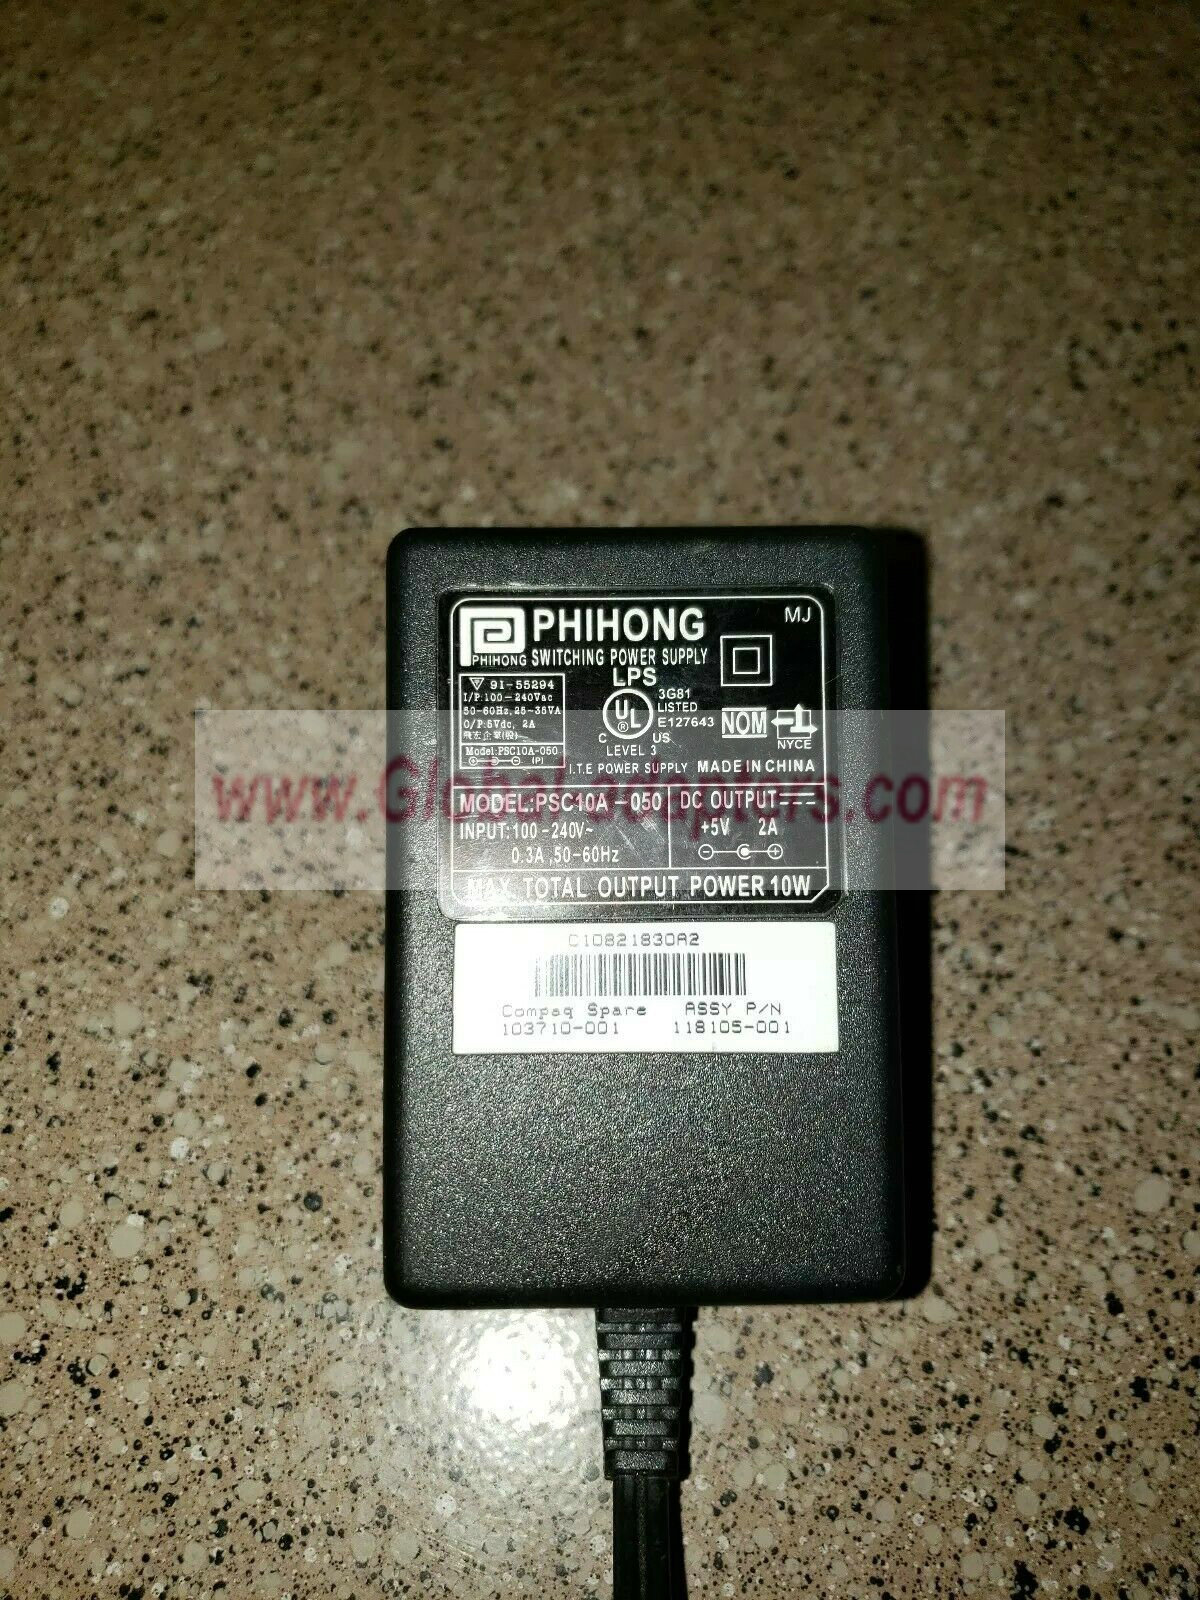 NEW 5V 2A Phihong PSC10A-050 AC Power Adapter